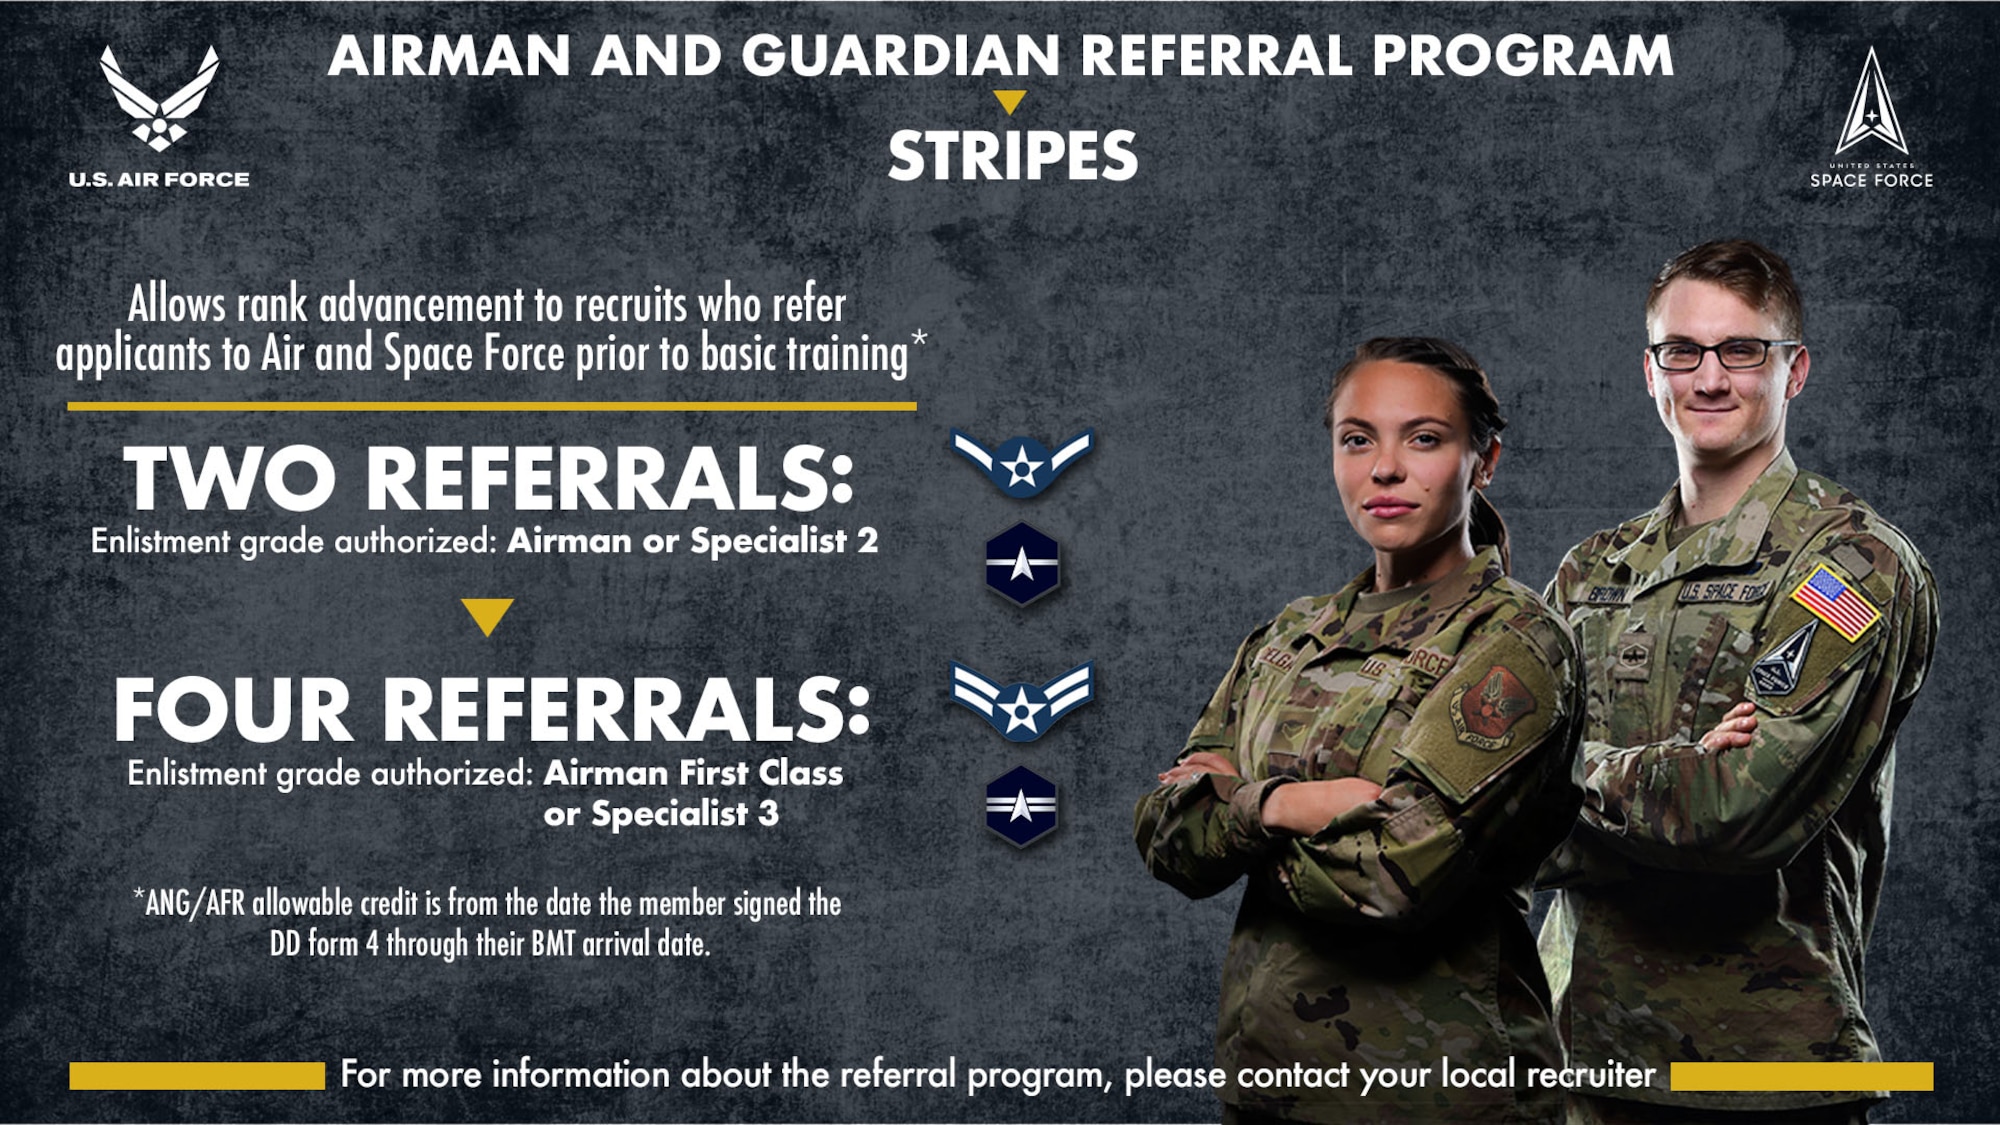 Air Force, Space Force to offer medals, promotions for recruiting support